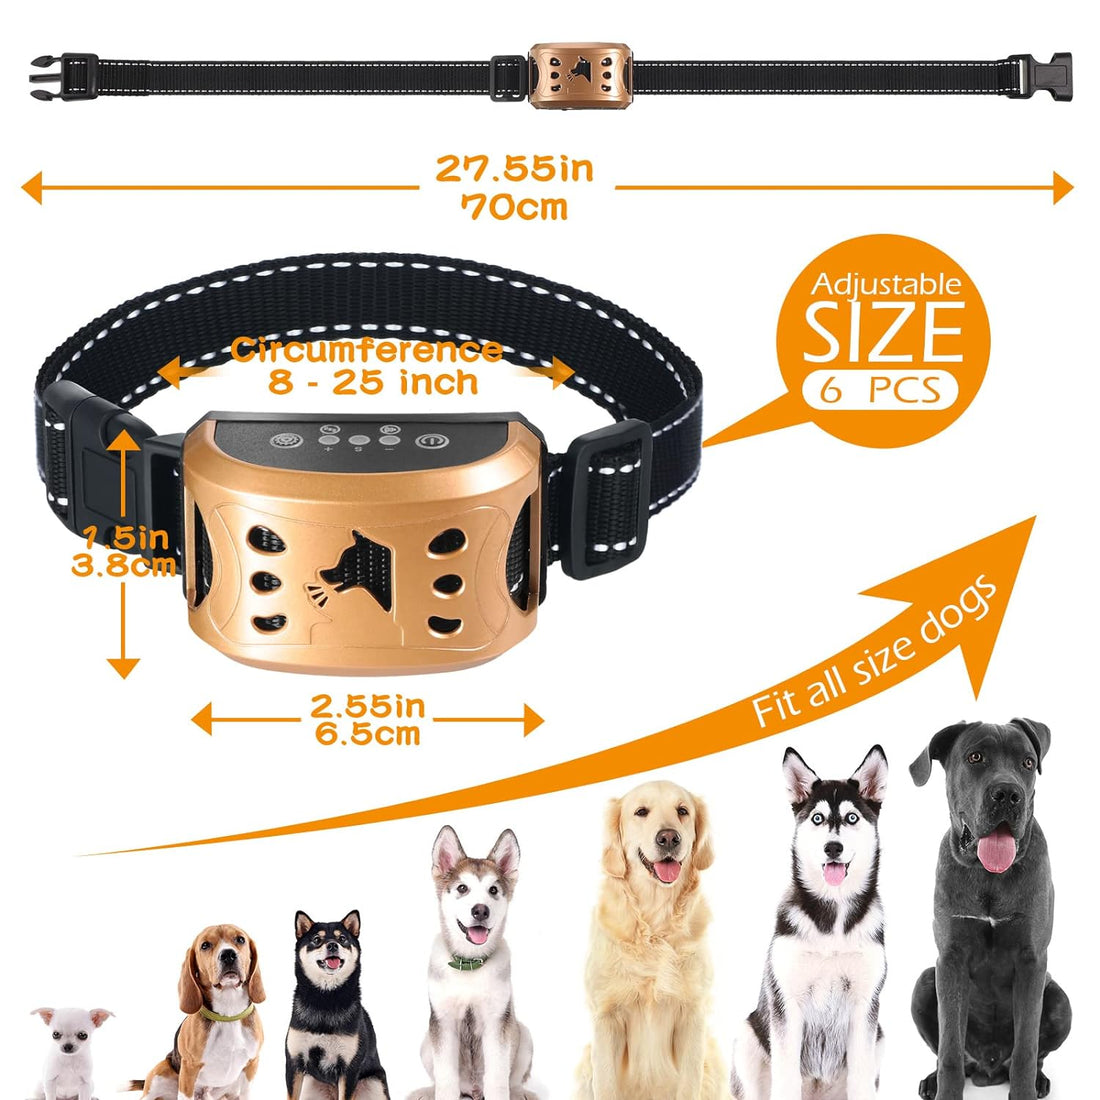 6 Pcs Dog Bark Collar Rechargeable Bark Collars for Dogs Harmless Shock Anti Barking Collar with 7 Adjustable Levels Vibration Correction and LED Indicator No Bark Collar for Small Medium Large Dog